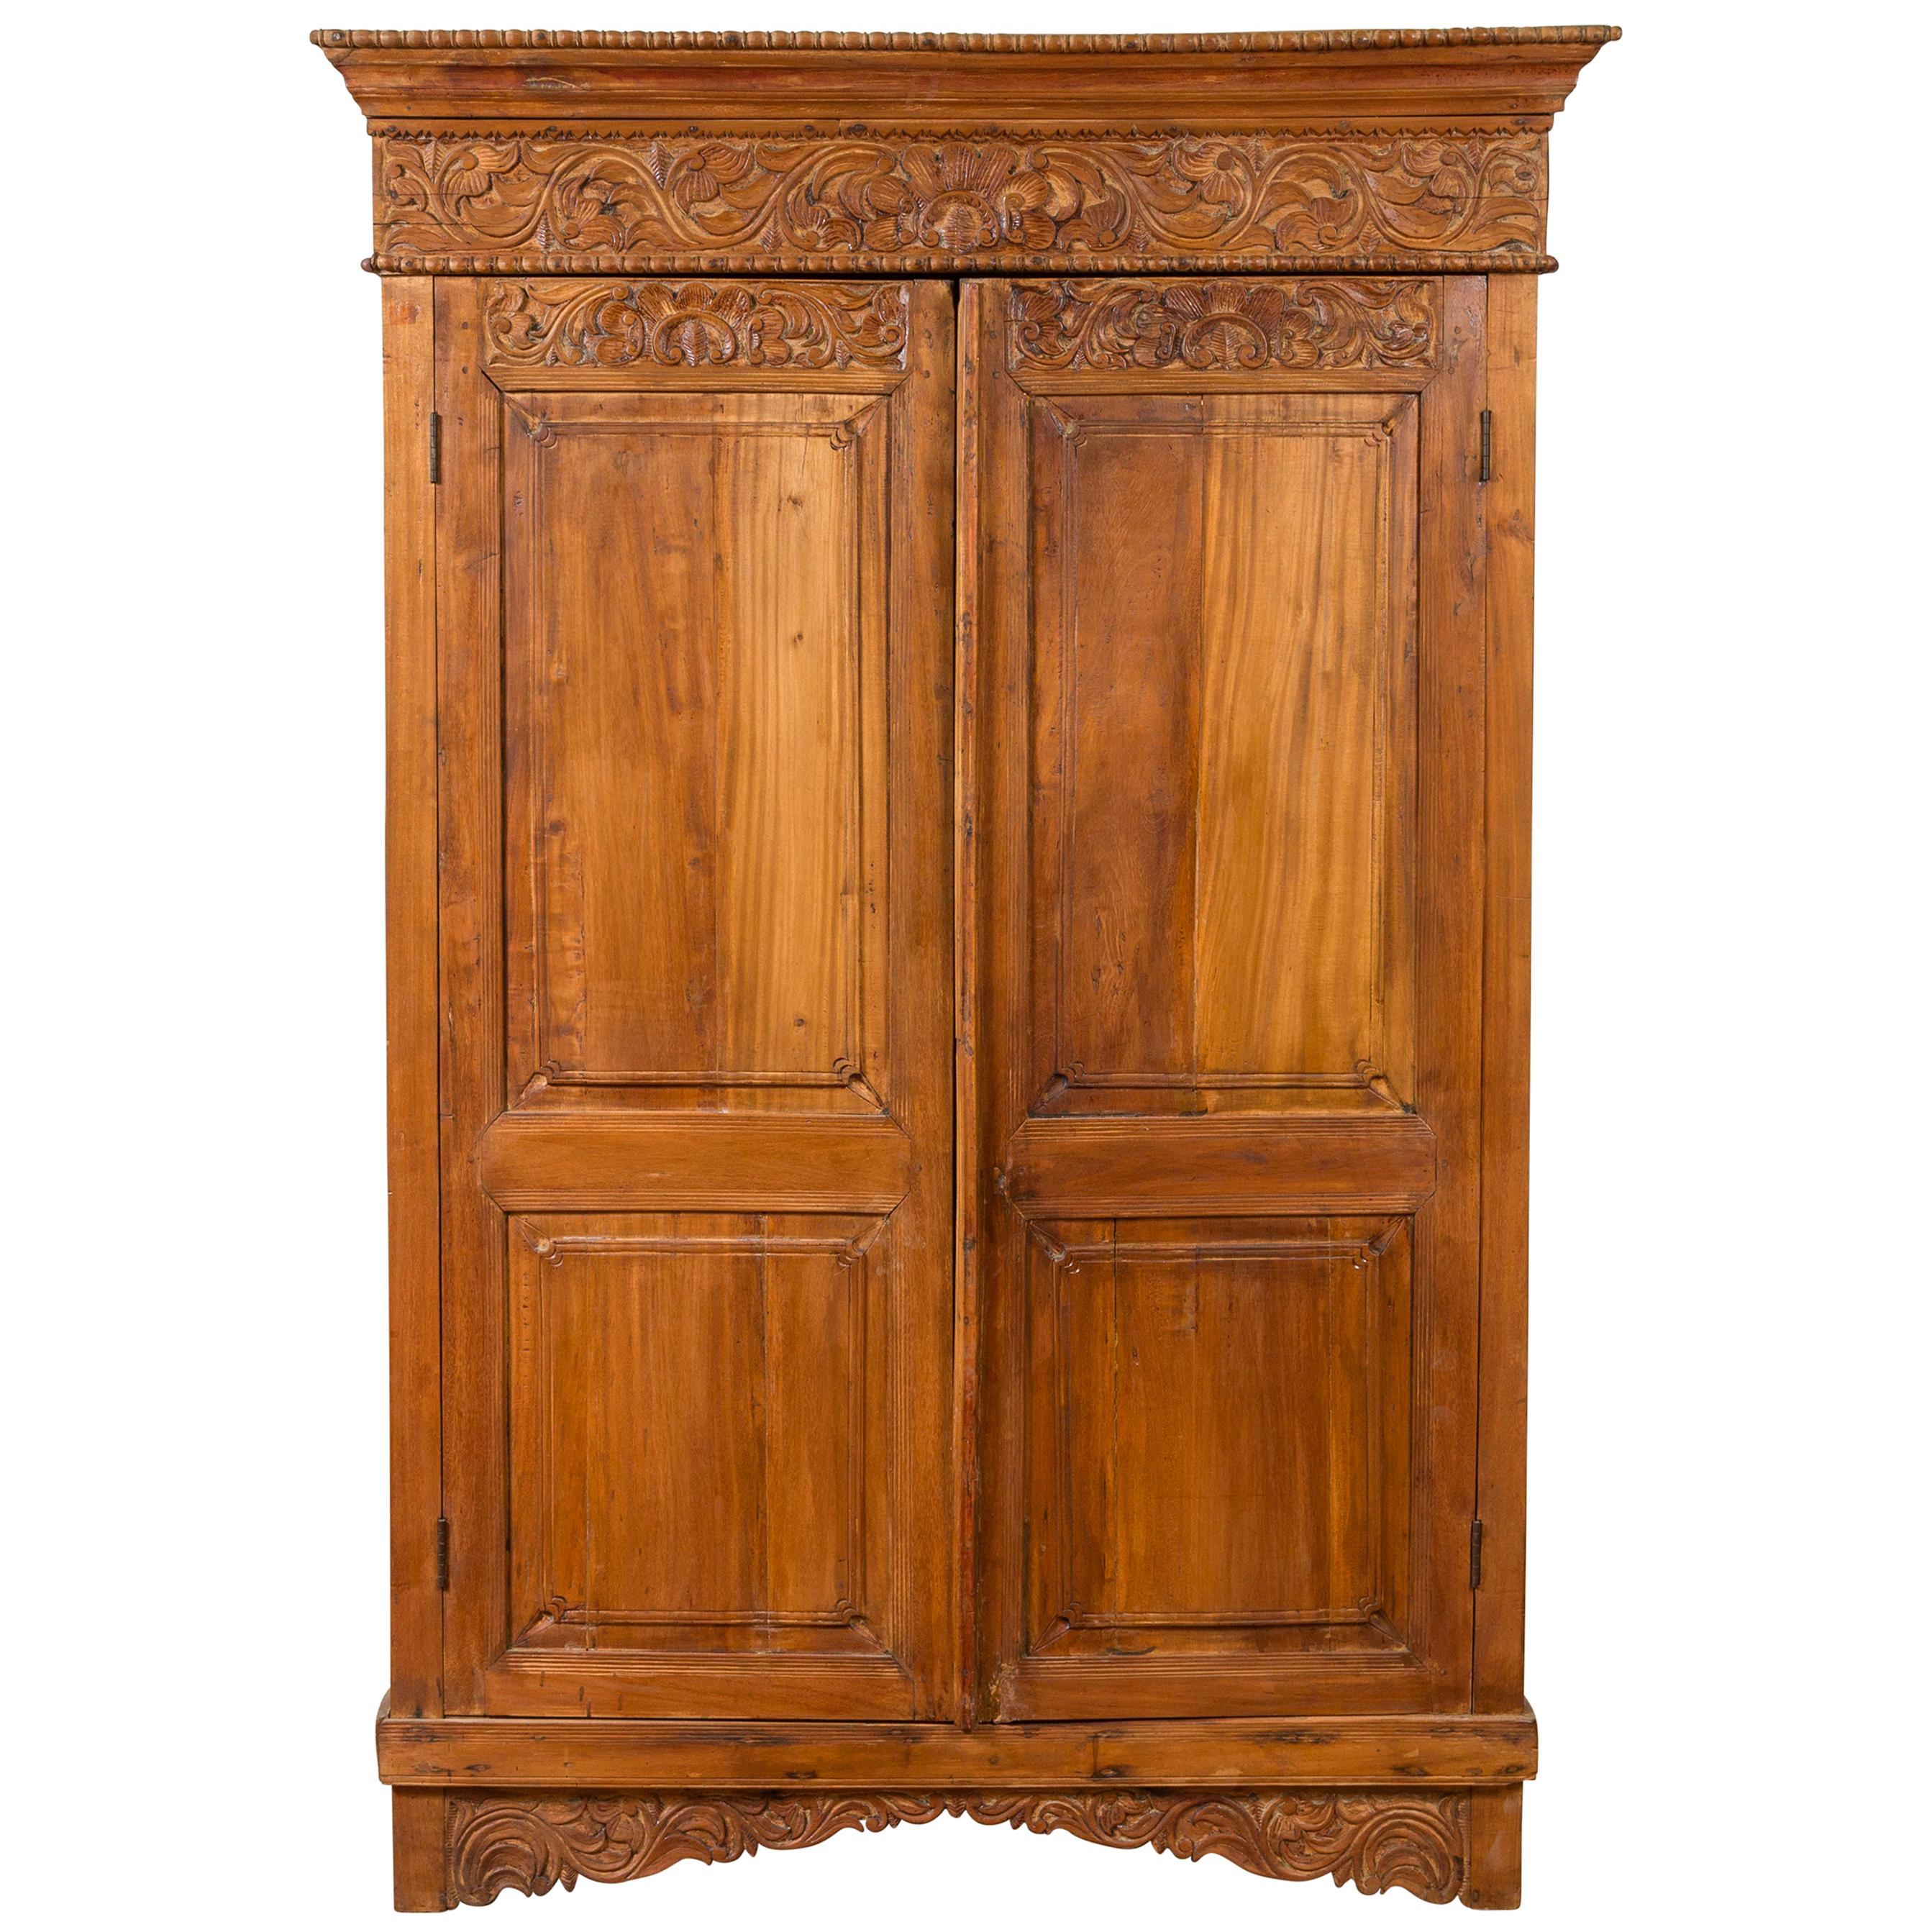 Indian 19th Century Tall Cabinet with Carved Scrolling Foliage and Beaded Motifs For Sale